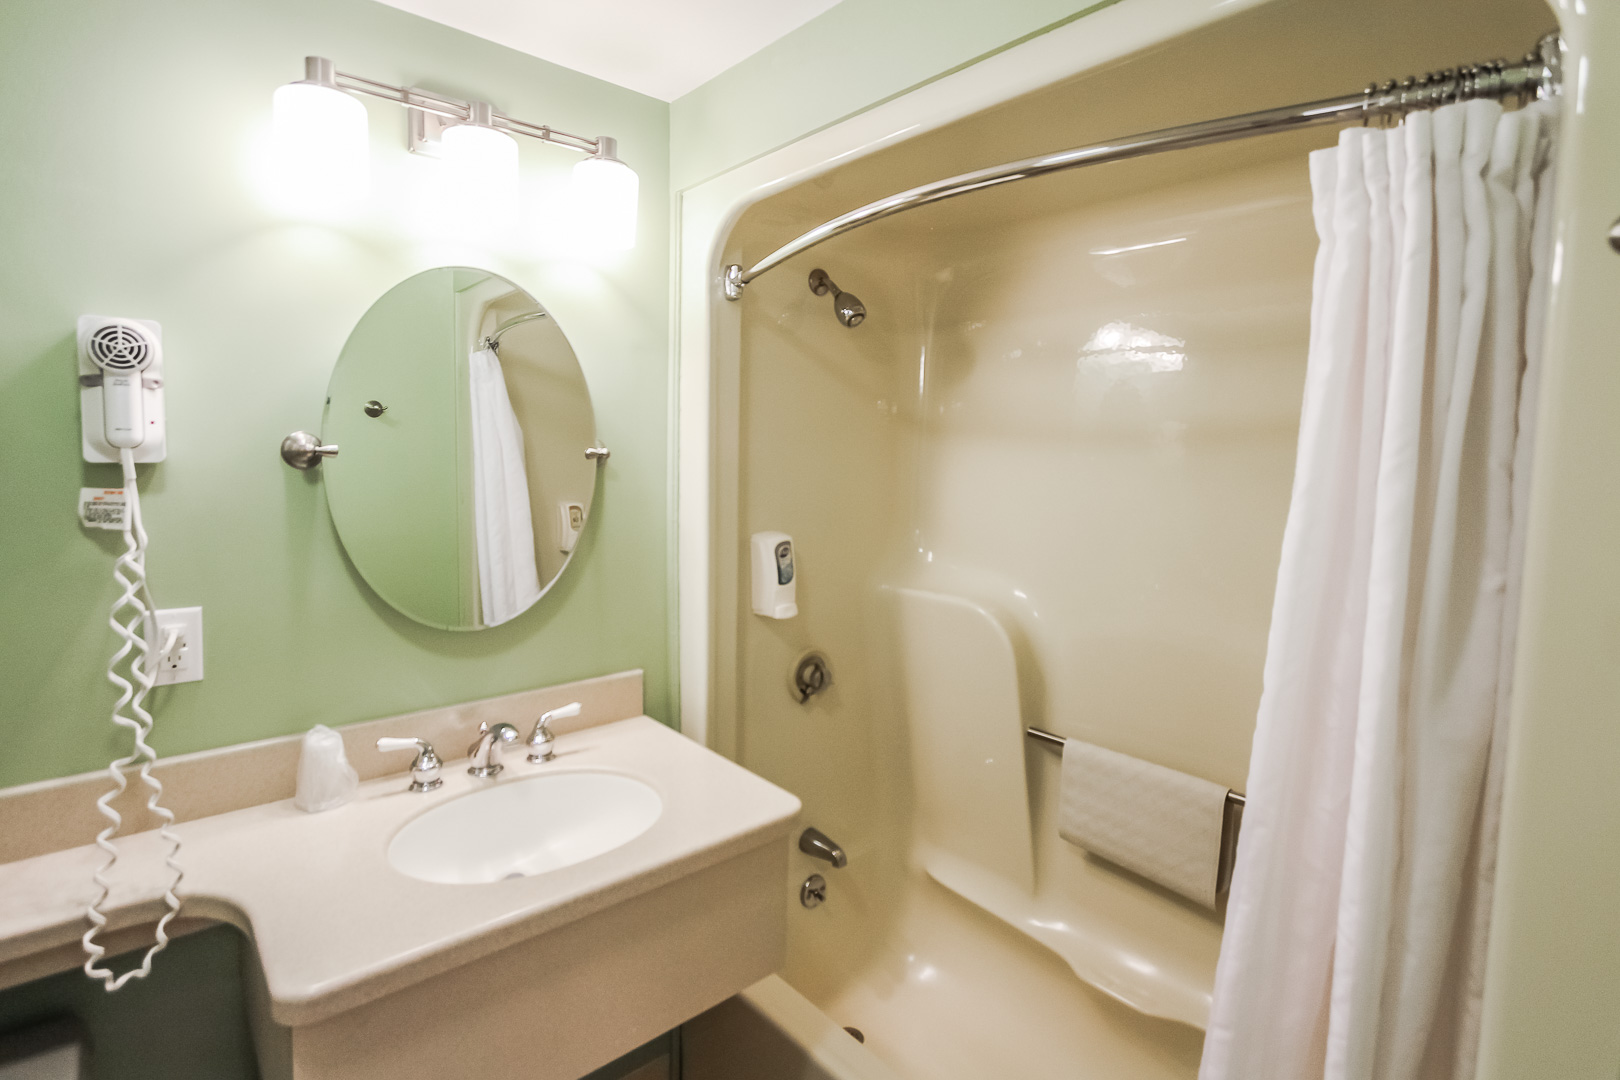 A spacious bathroom at VRI's Holly Tree Resort in Massachusetts.